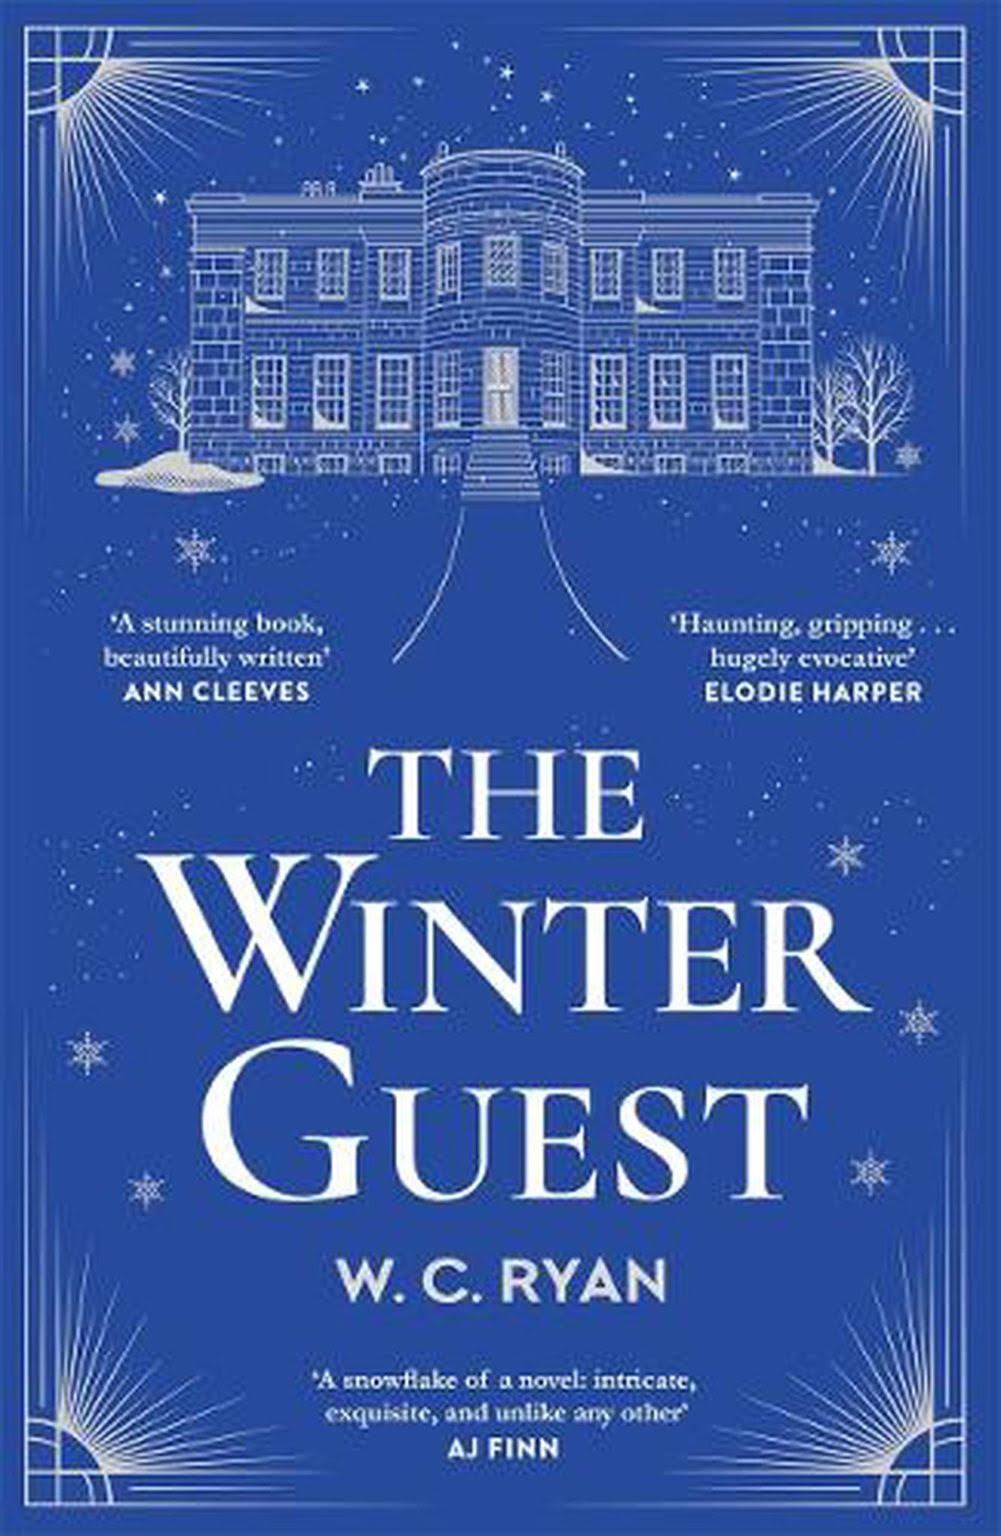 The Winter Guest by W. C. Ryan